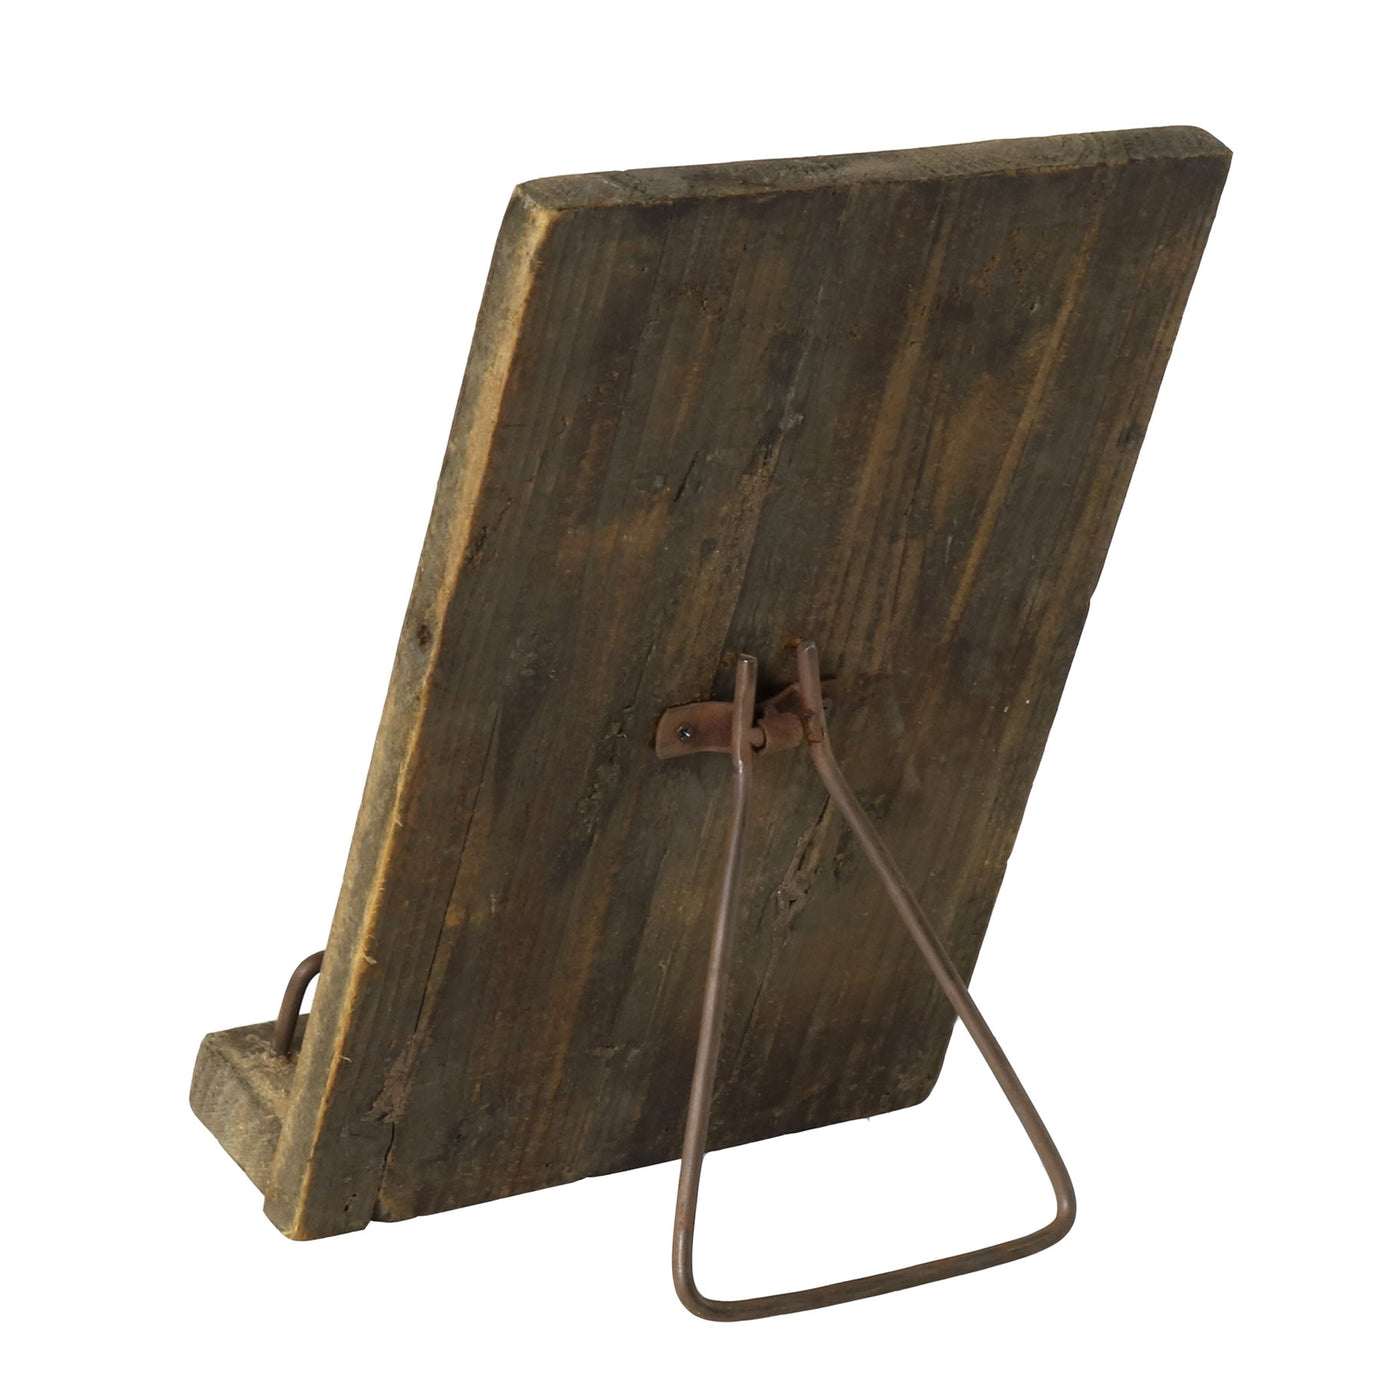 Rustic Wooden Book Stand